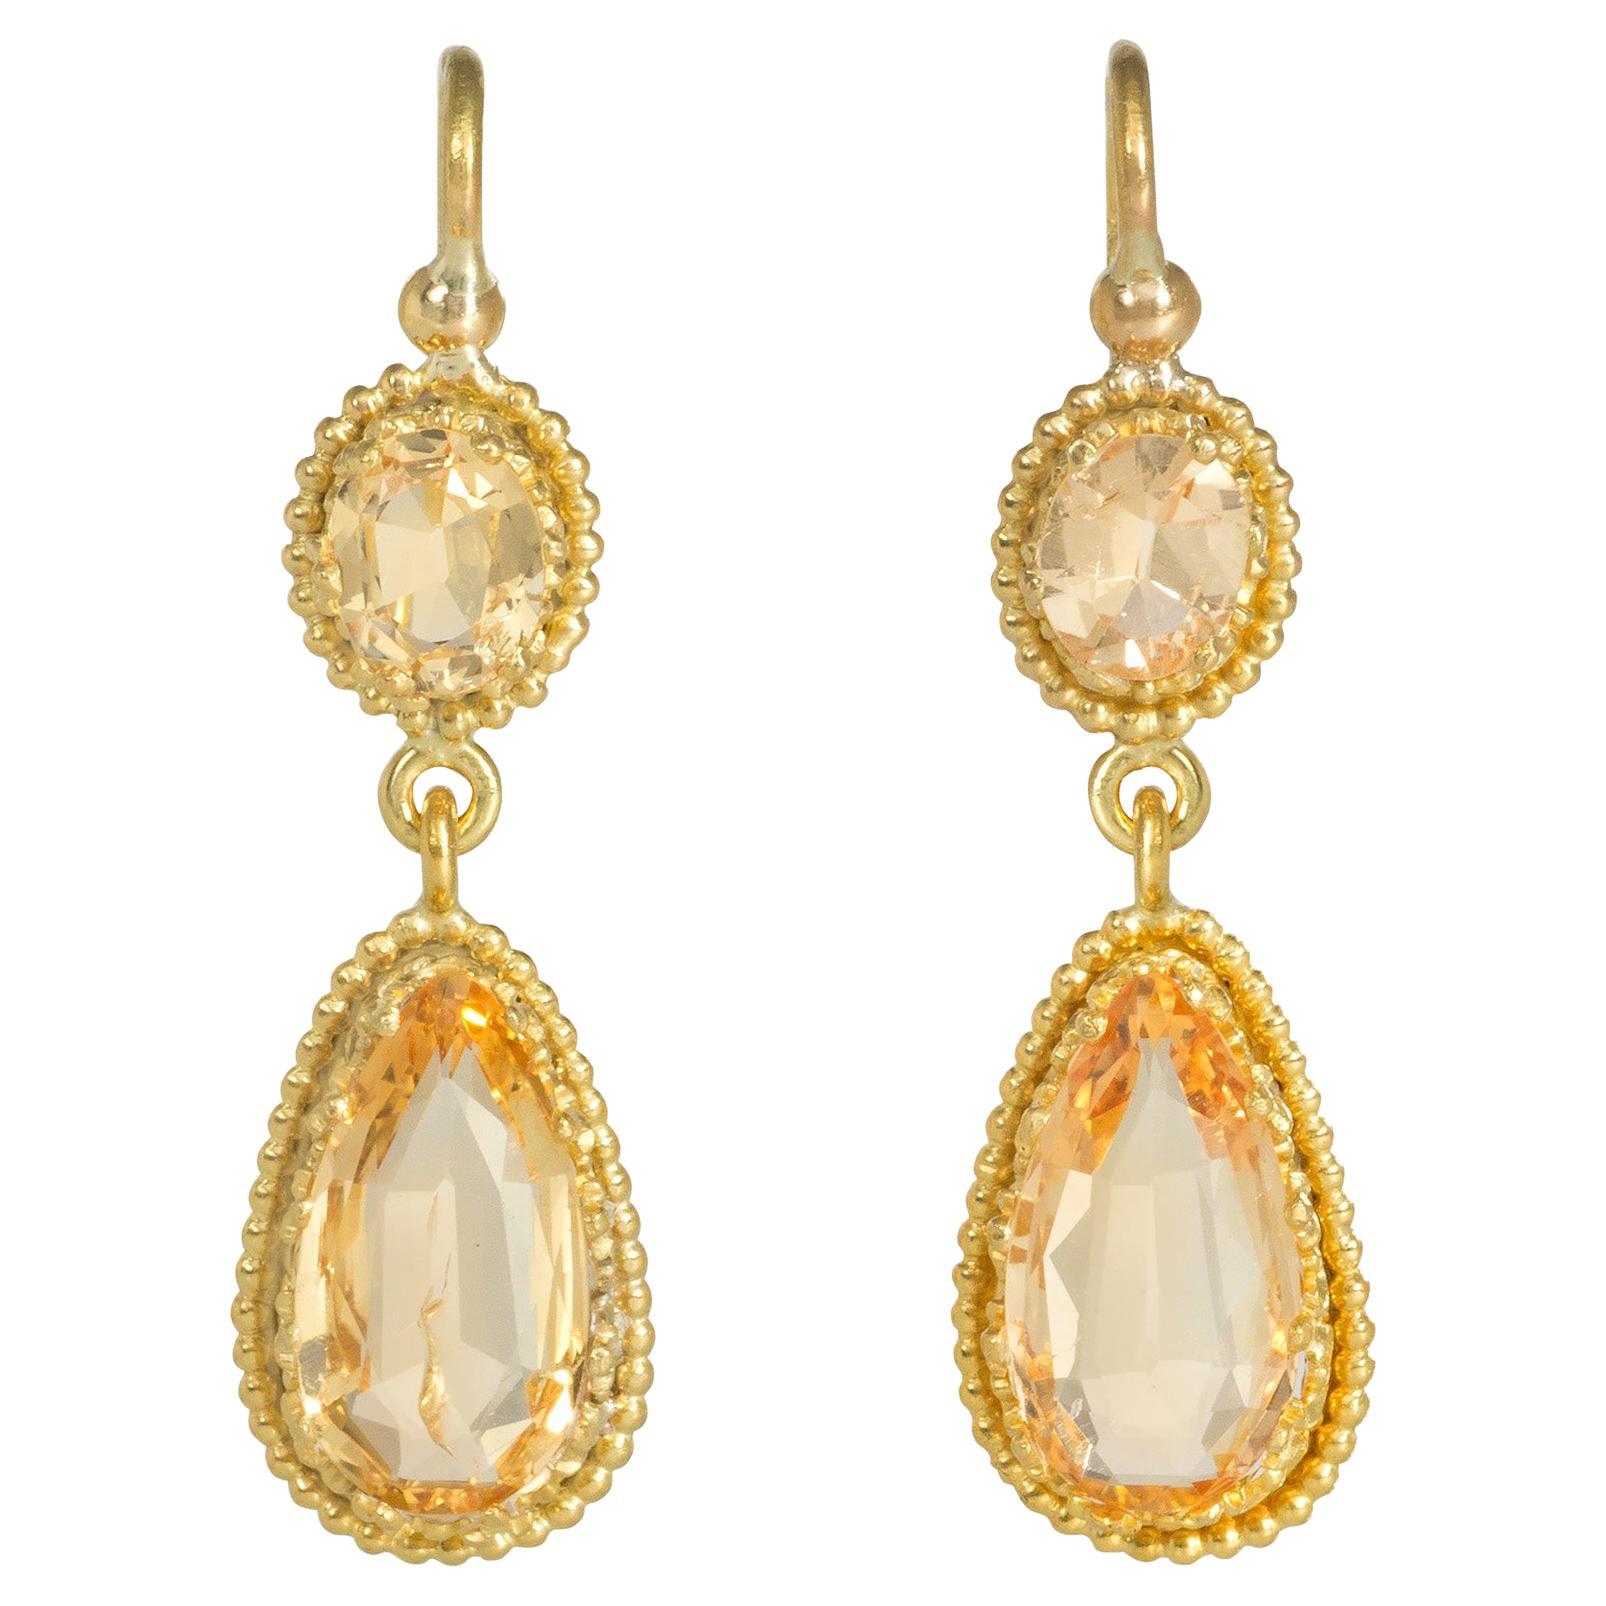 Victorian Gold and Topaz Two-Stone Earrings with Pear-Shaped Drops